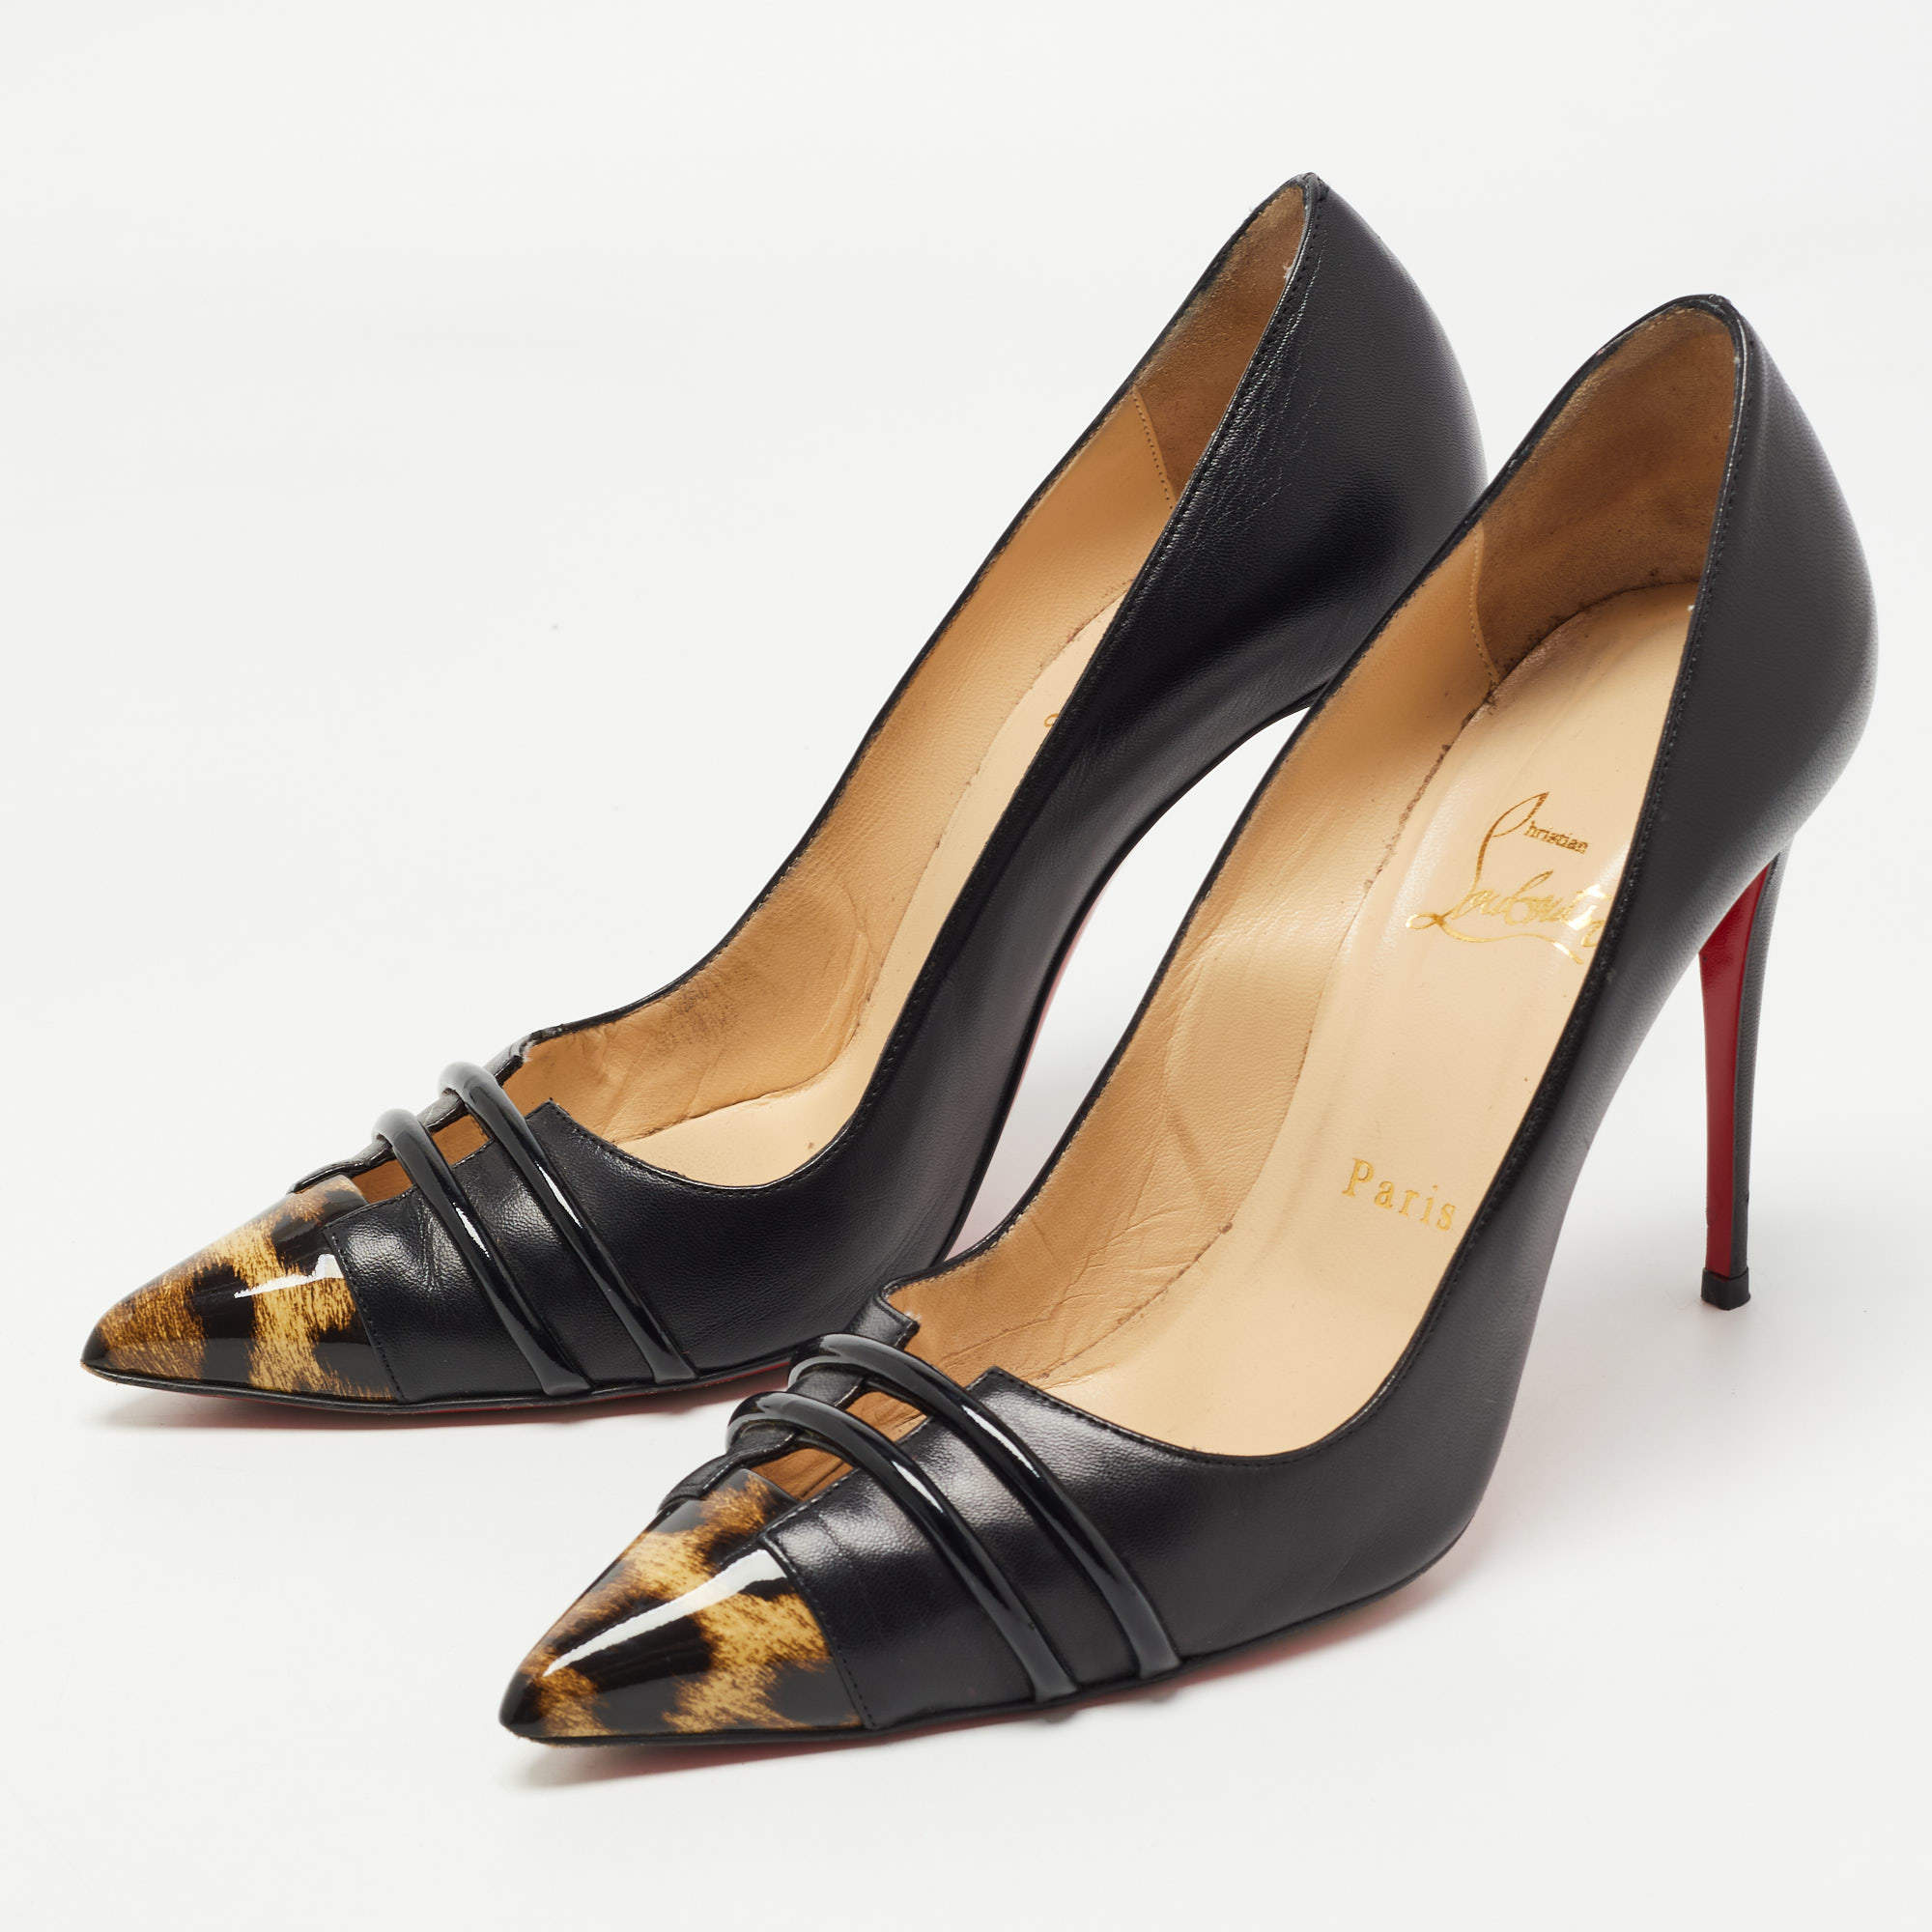 Christian Louboutin Black/Brown Leather and Leopard Print Patent Front Pumps Size 38.5 Christian Louboutin | TLC